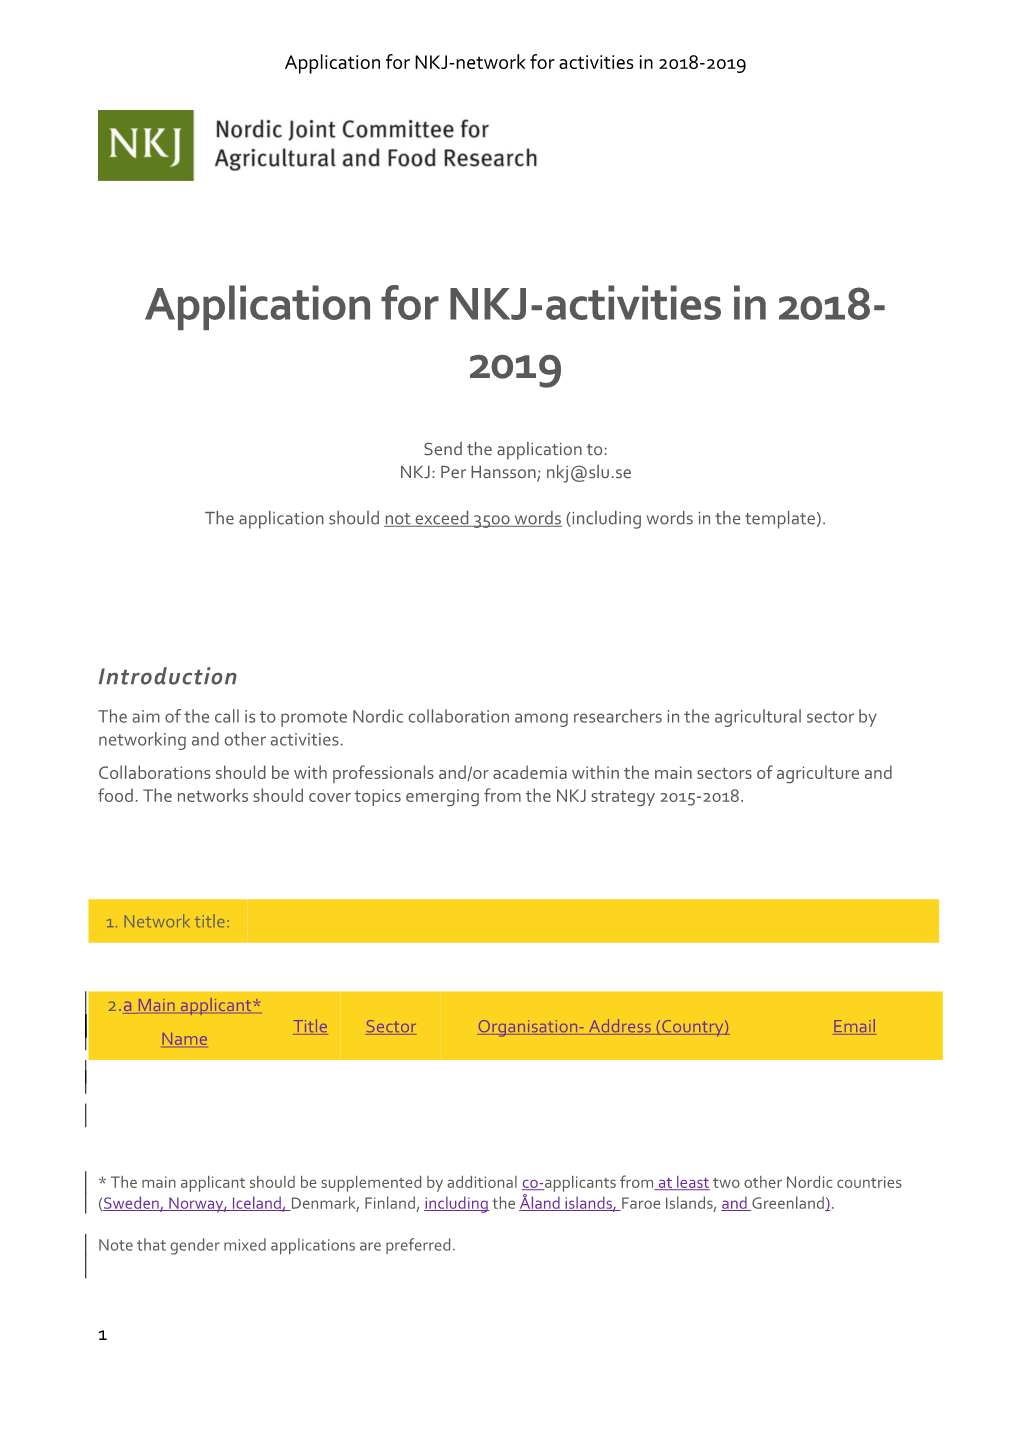 Application for NKJ-Network for Activities in 2018-2019